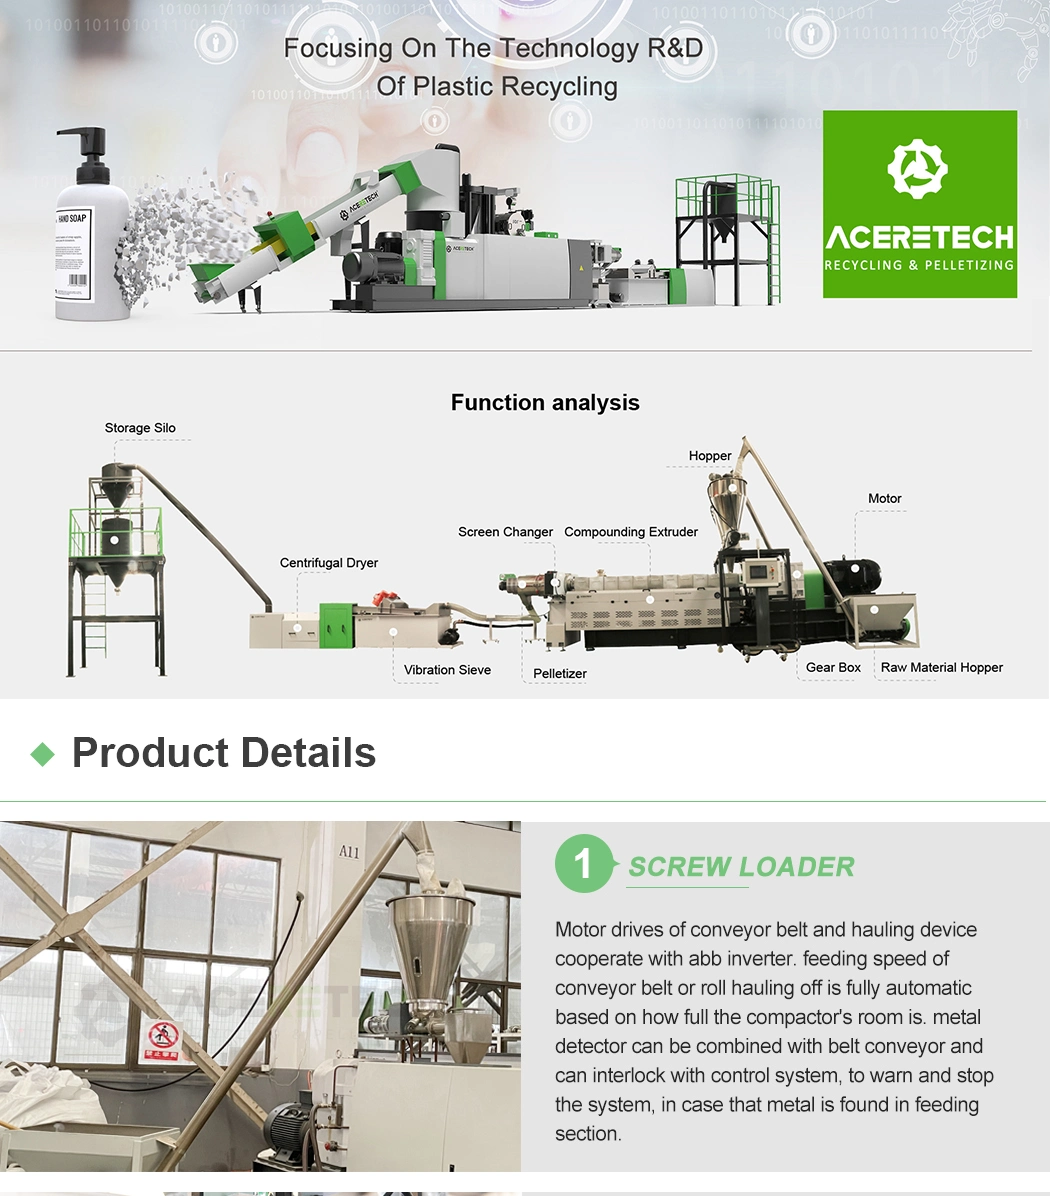 Twin Screw Extruder for Silane Cross Linking Cable Material Compounding Pelletizing